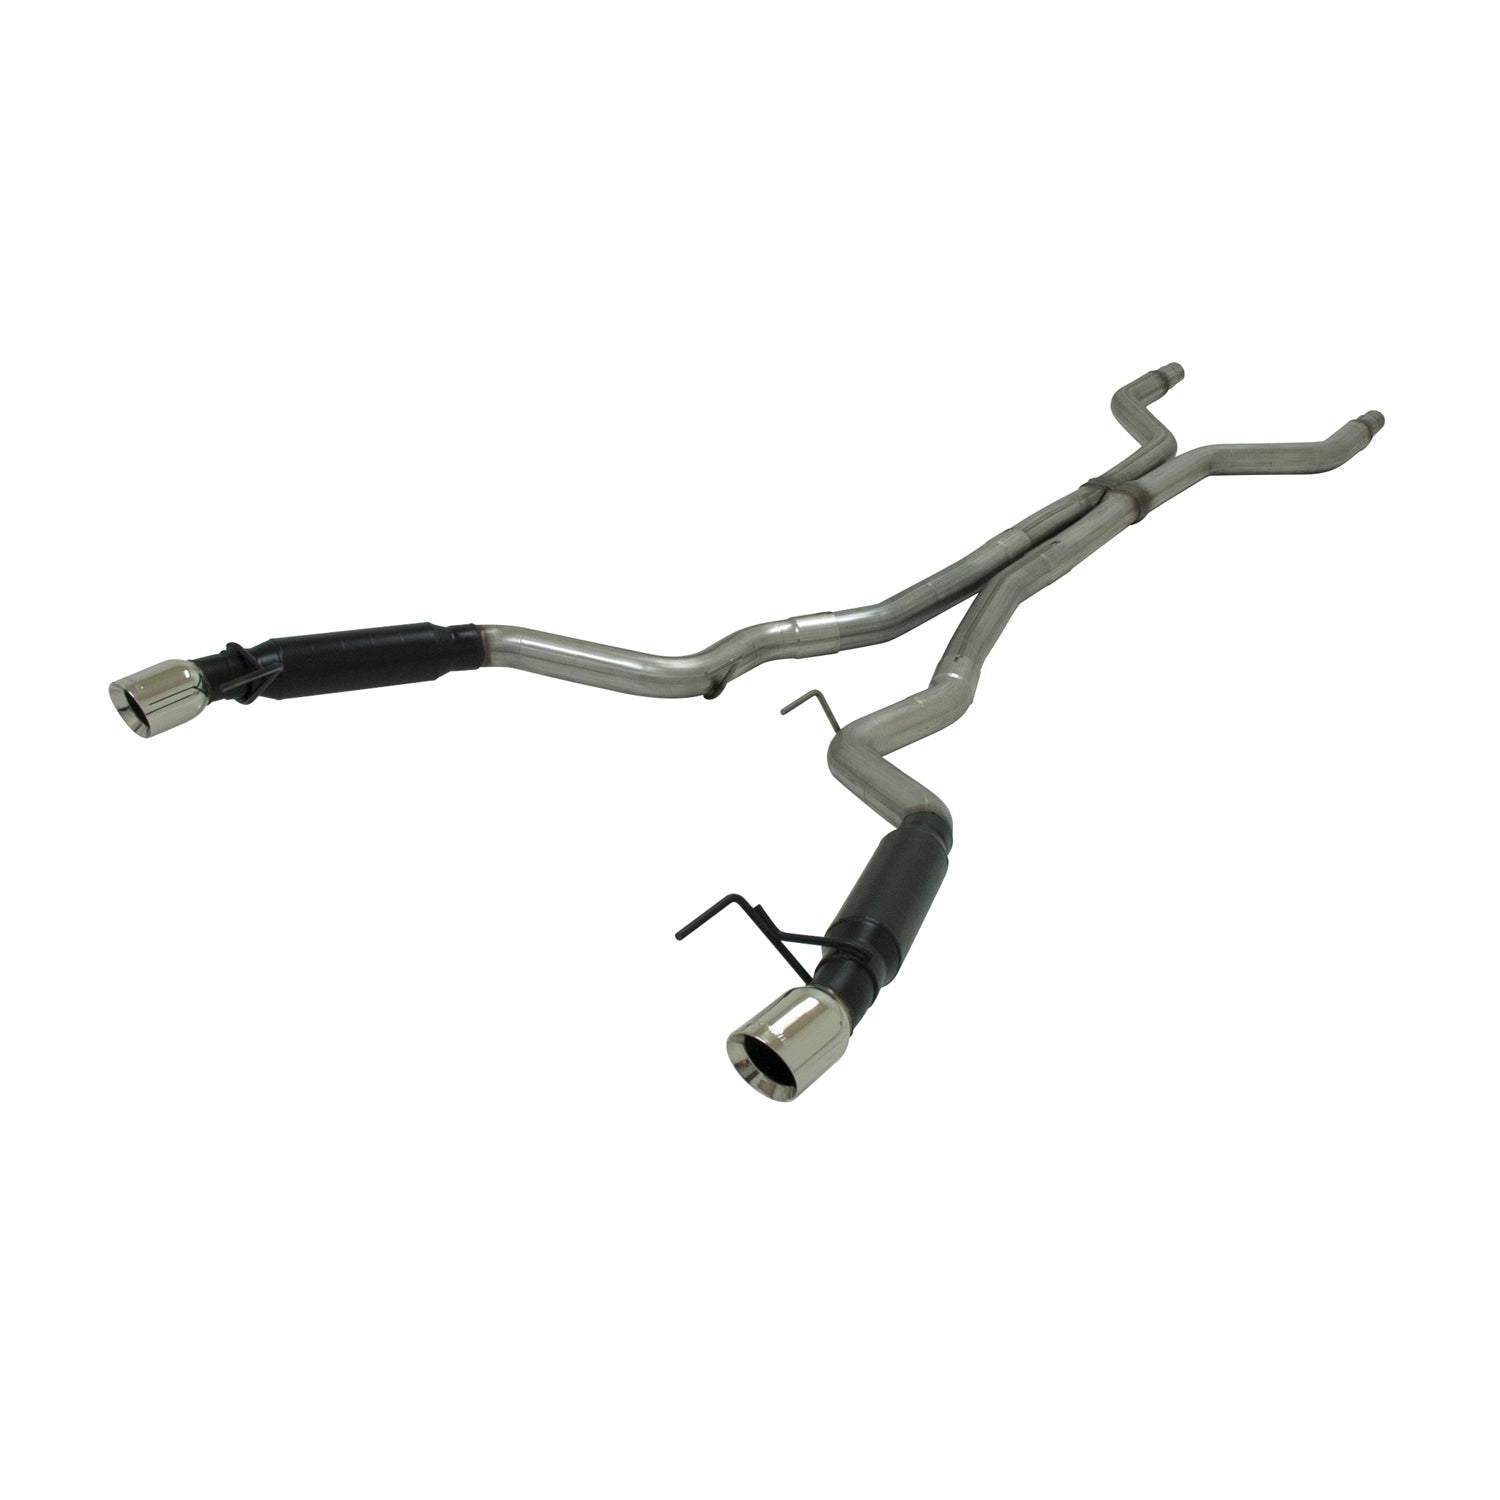 Flowmaster Cat-back Exhaust System - Outlaw - Dor - Aggressive Sound 817734